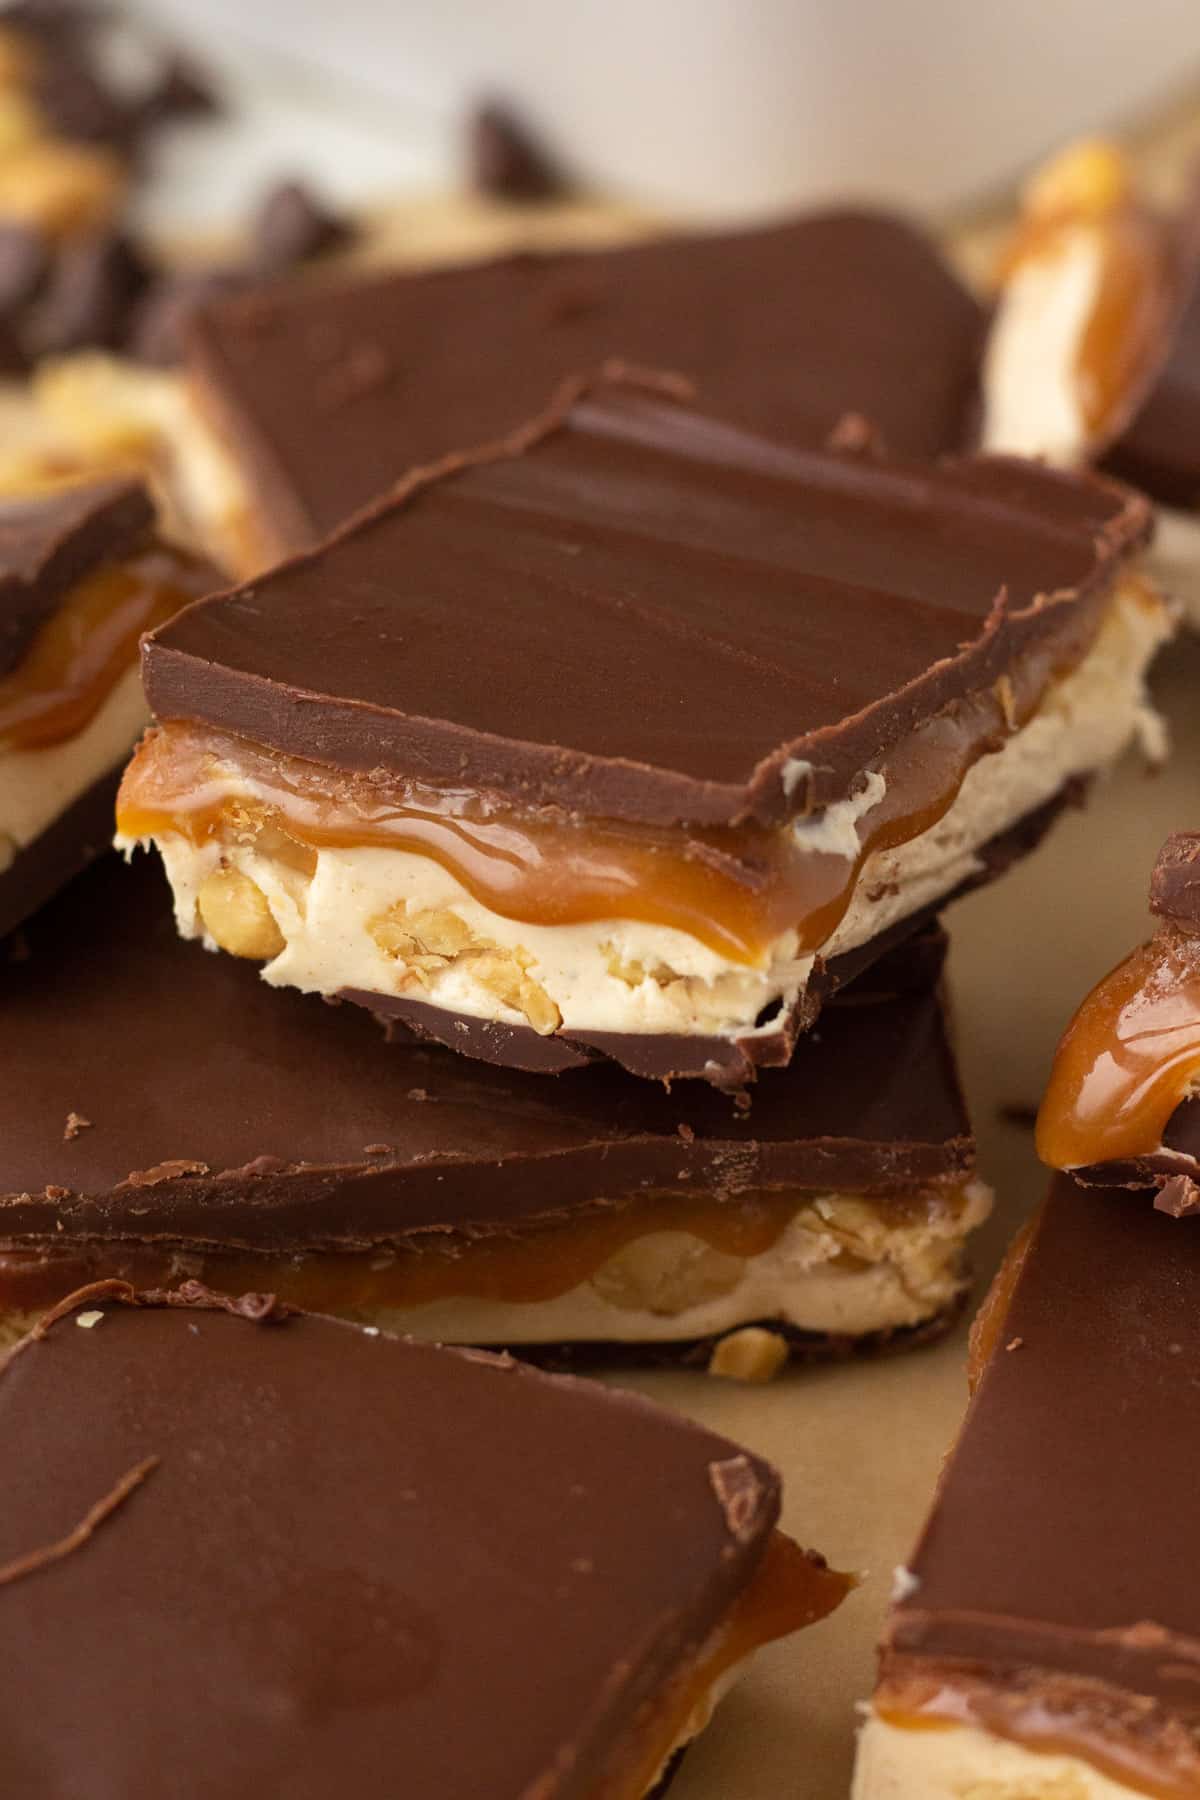 Stacked pieces of fudge with caramel dripping down sides.